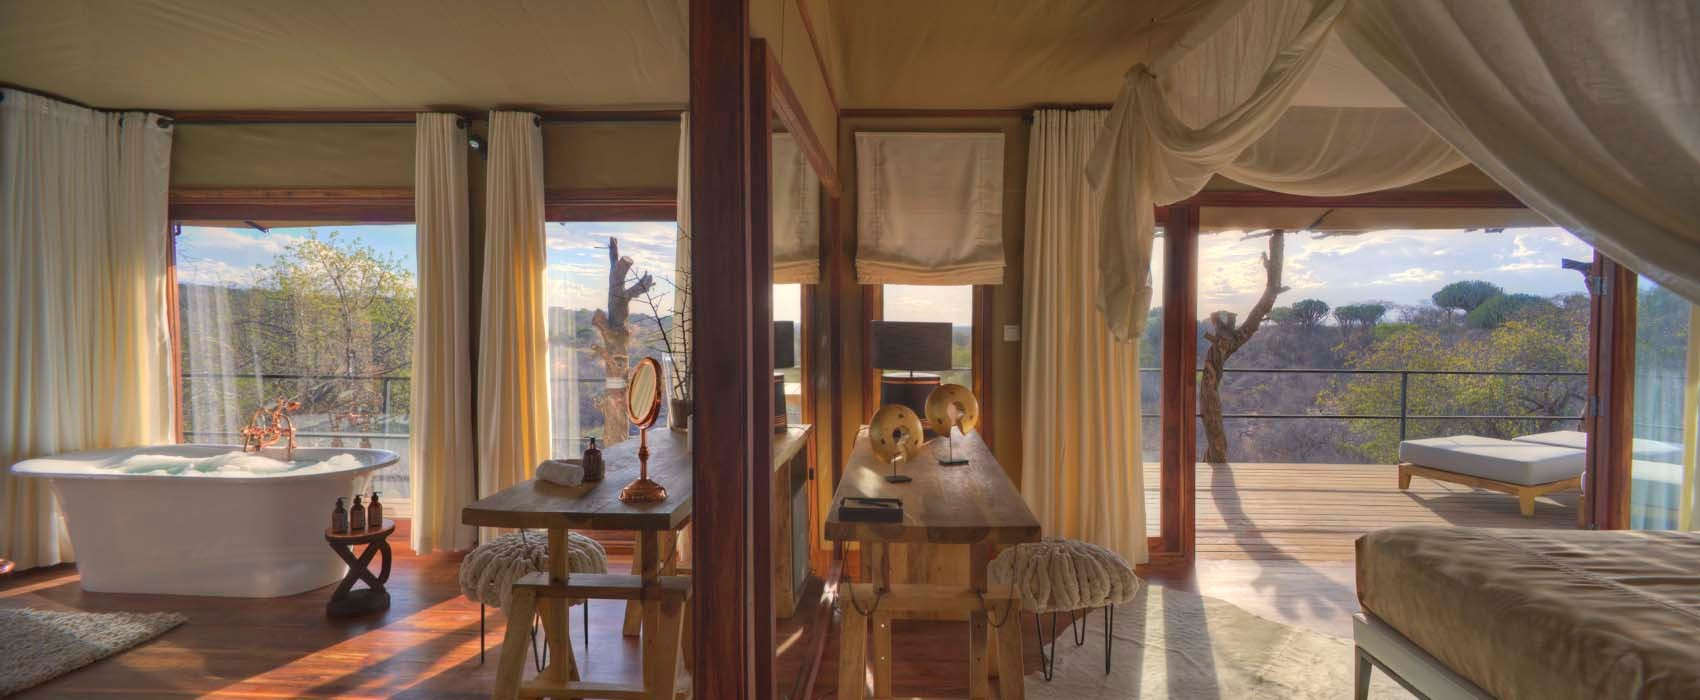 Tented accommodation safaris africa